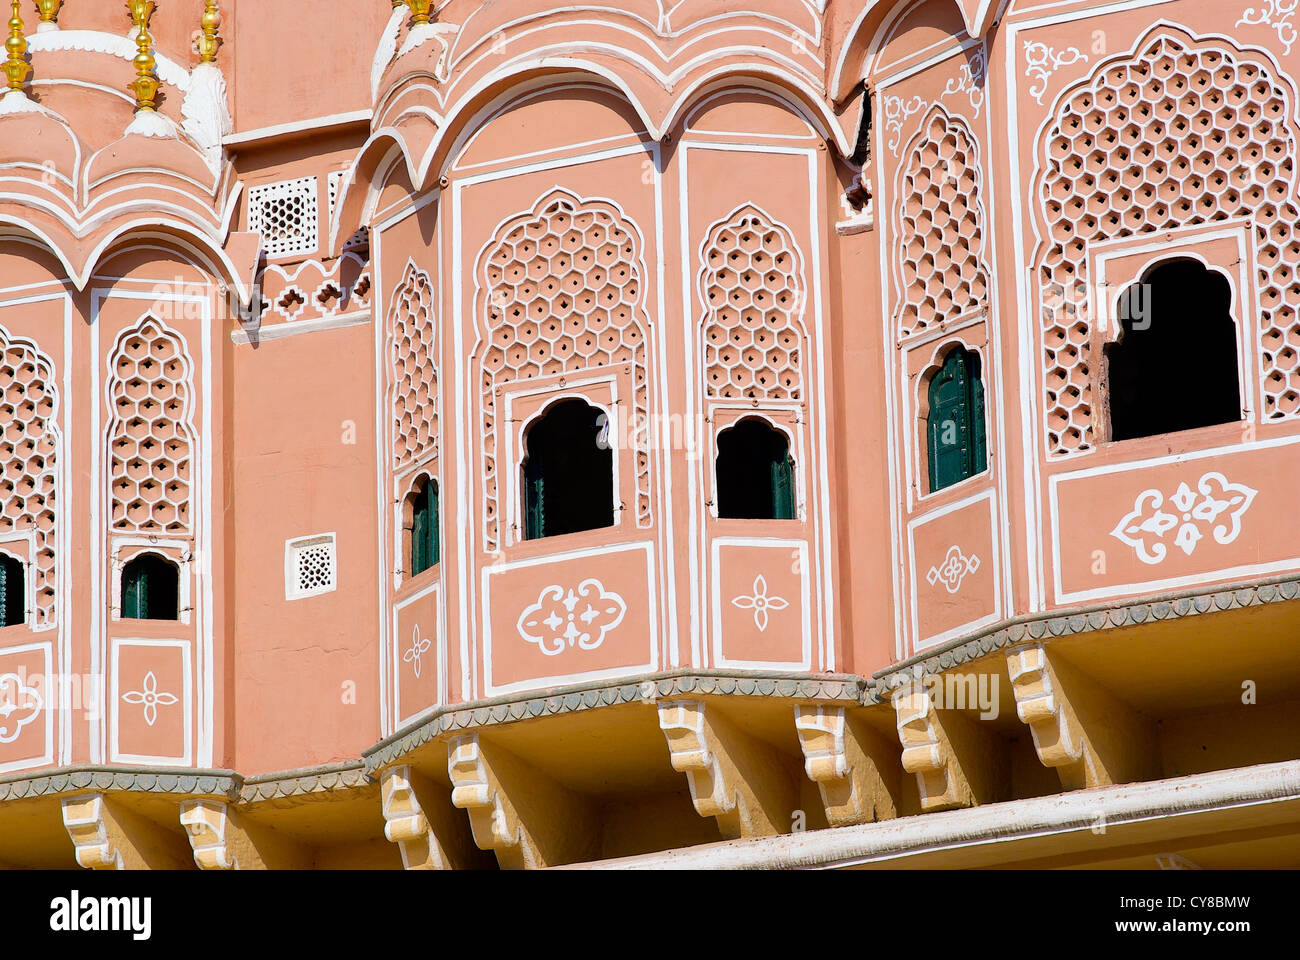 Close up of part of the Hawa Mahal (Palace of the Winds) in Jaipur, Rajasthan, India Stock Photo